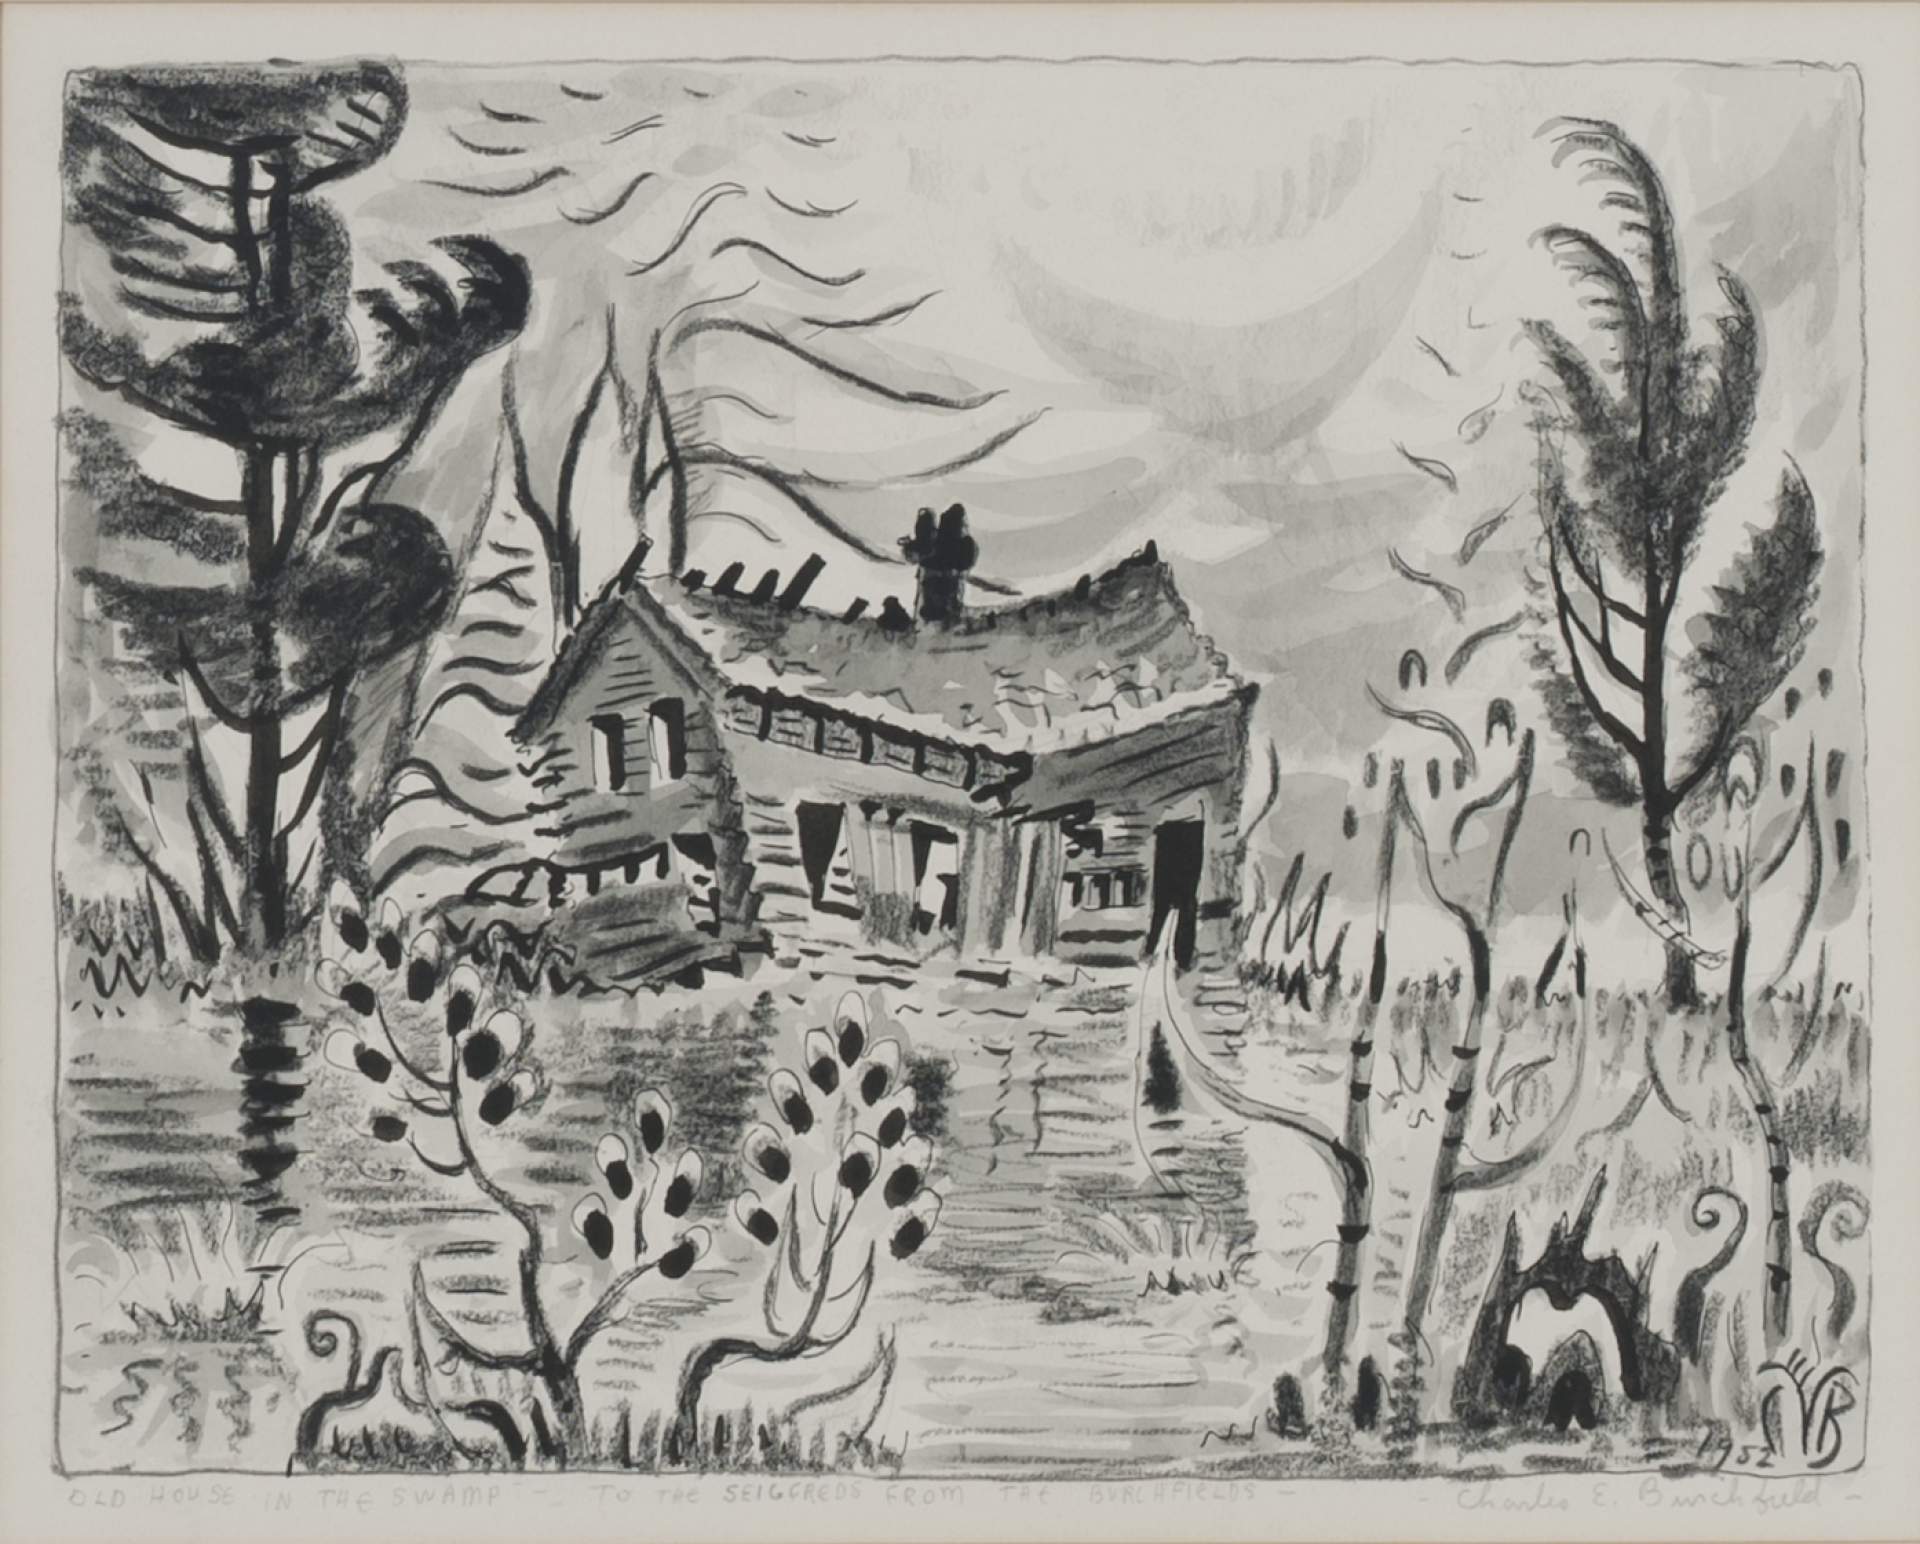 <em>Old House in the Swamp</em> by Charles E. Burchfield enters the museum collection